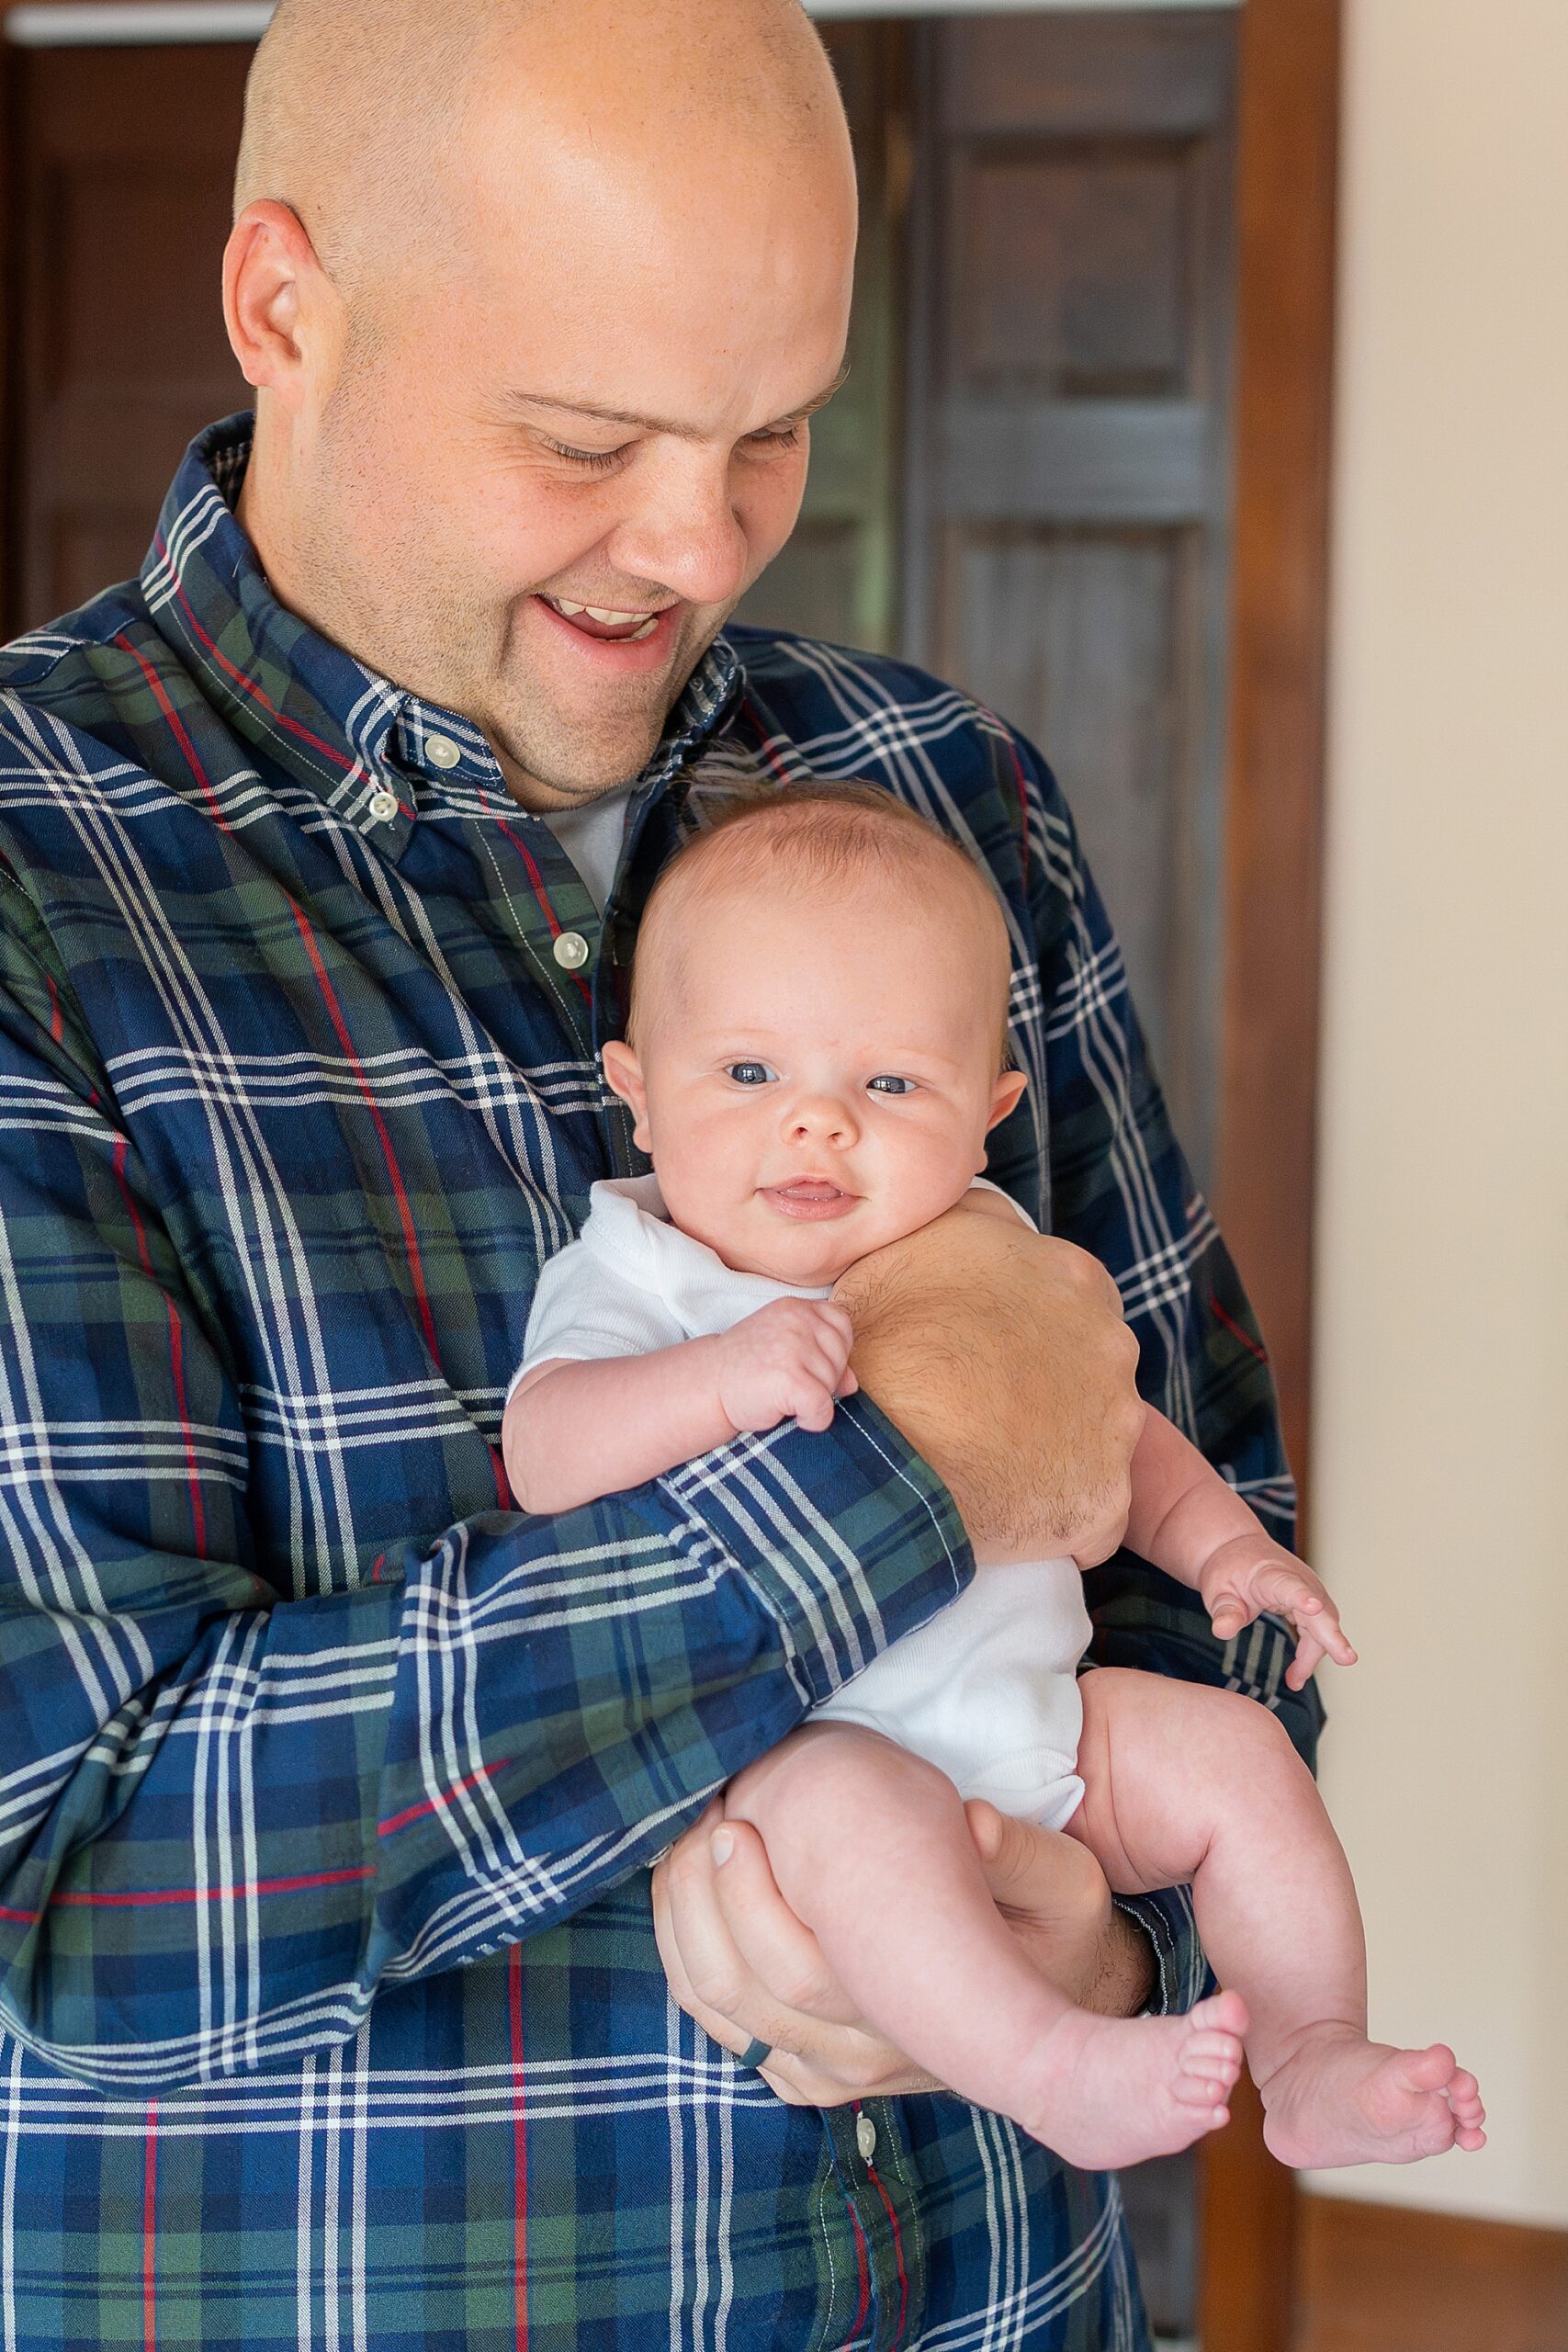 A smiling bald dad holding a baby with a slight grin indoors.